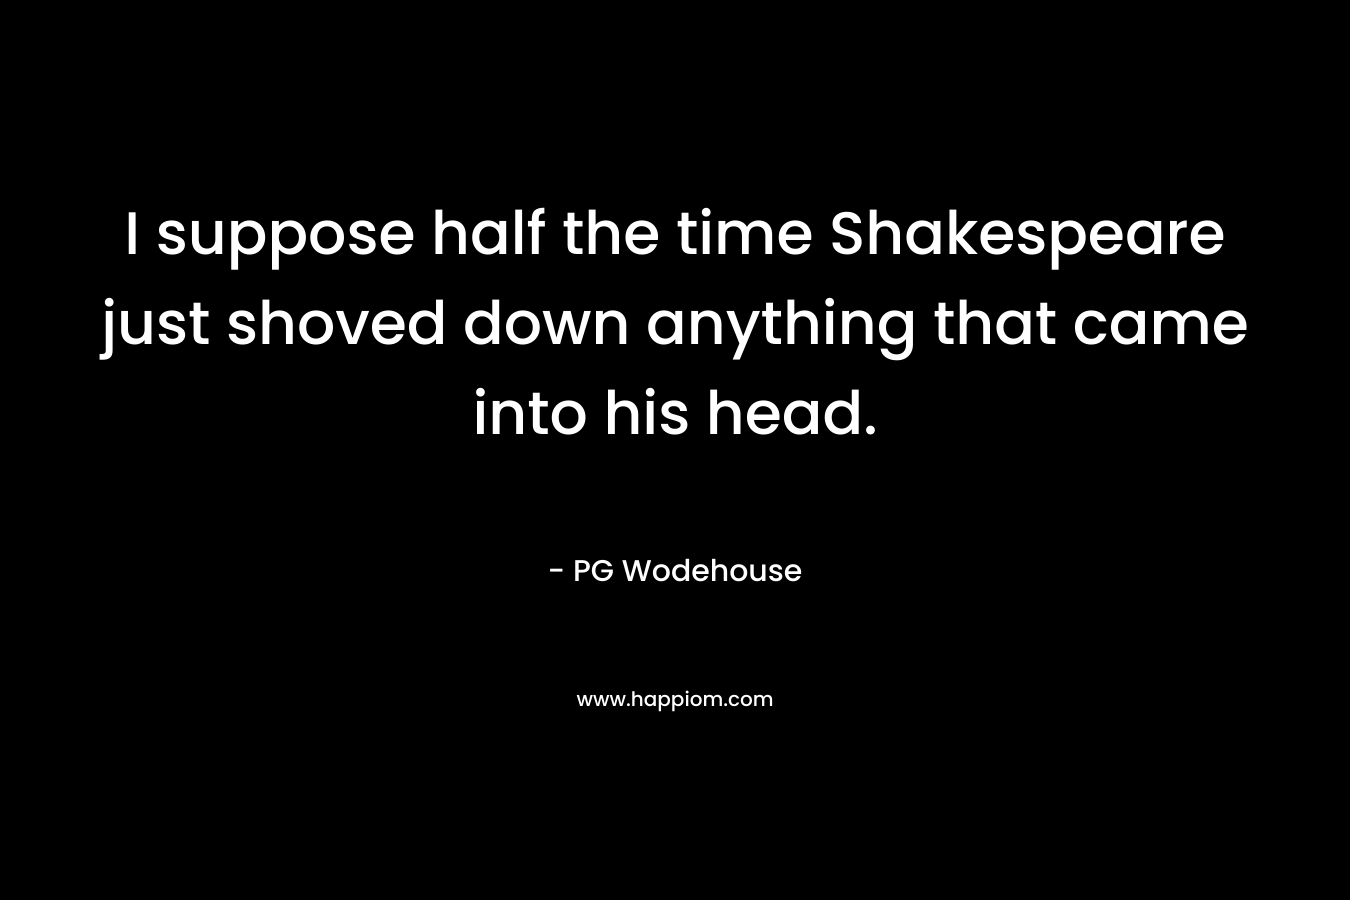 I suppose half the time Shakespeare just shoved down anything that came into his head.